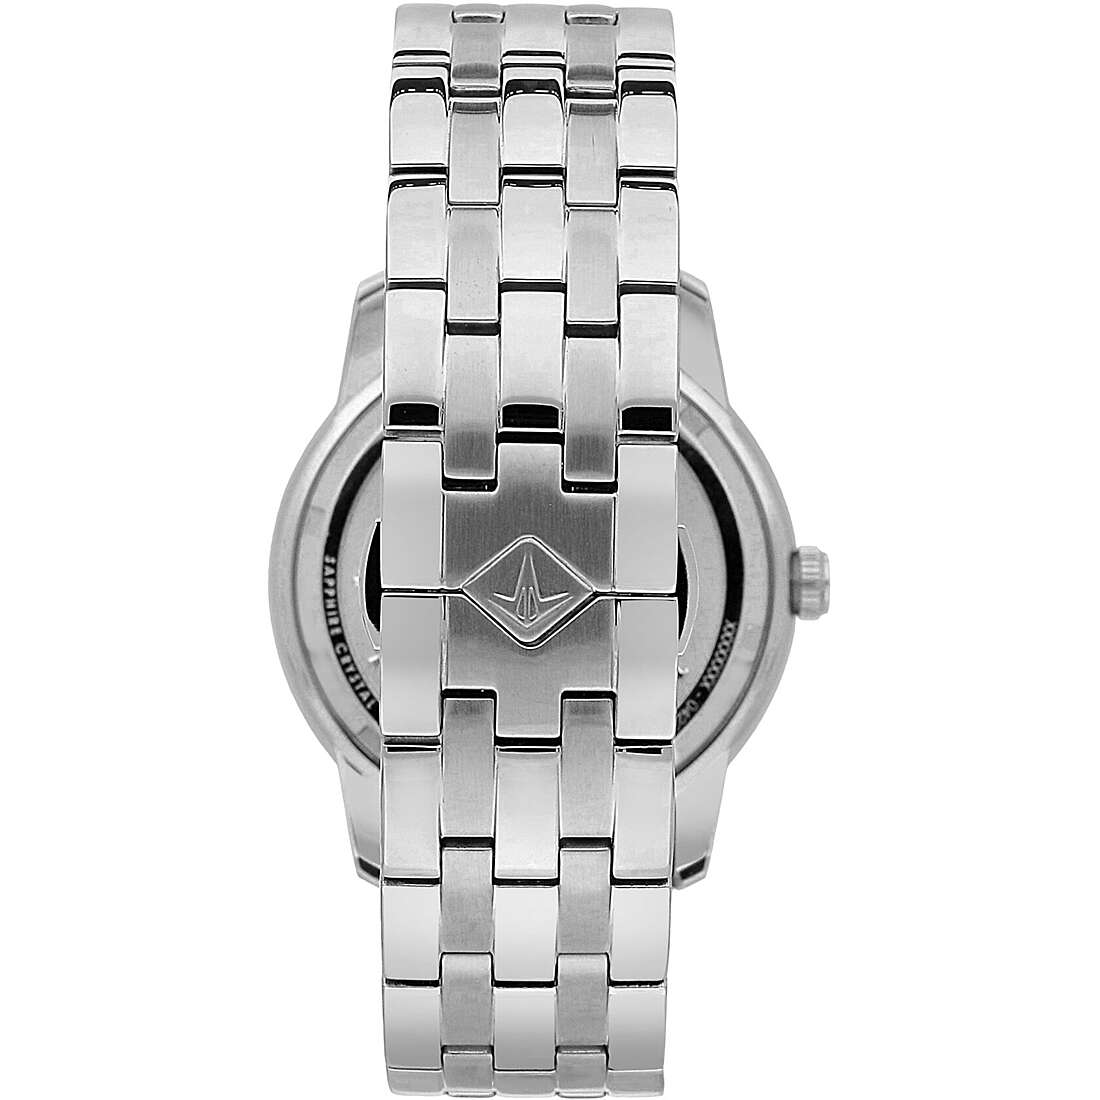 watch multifunction man Lucien Rochat Iconic R0423116004